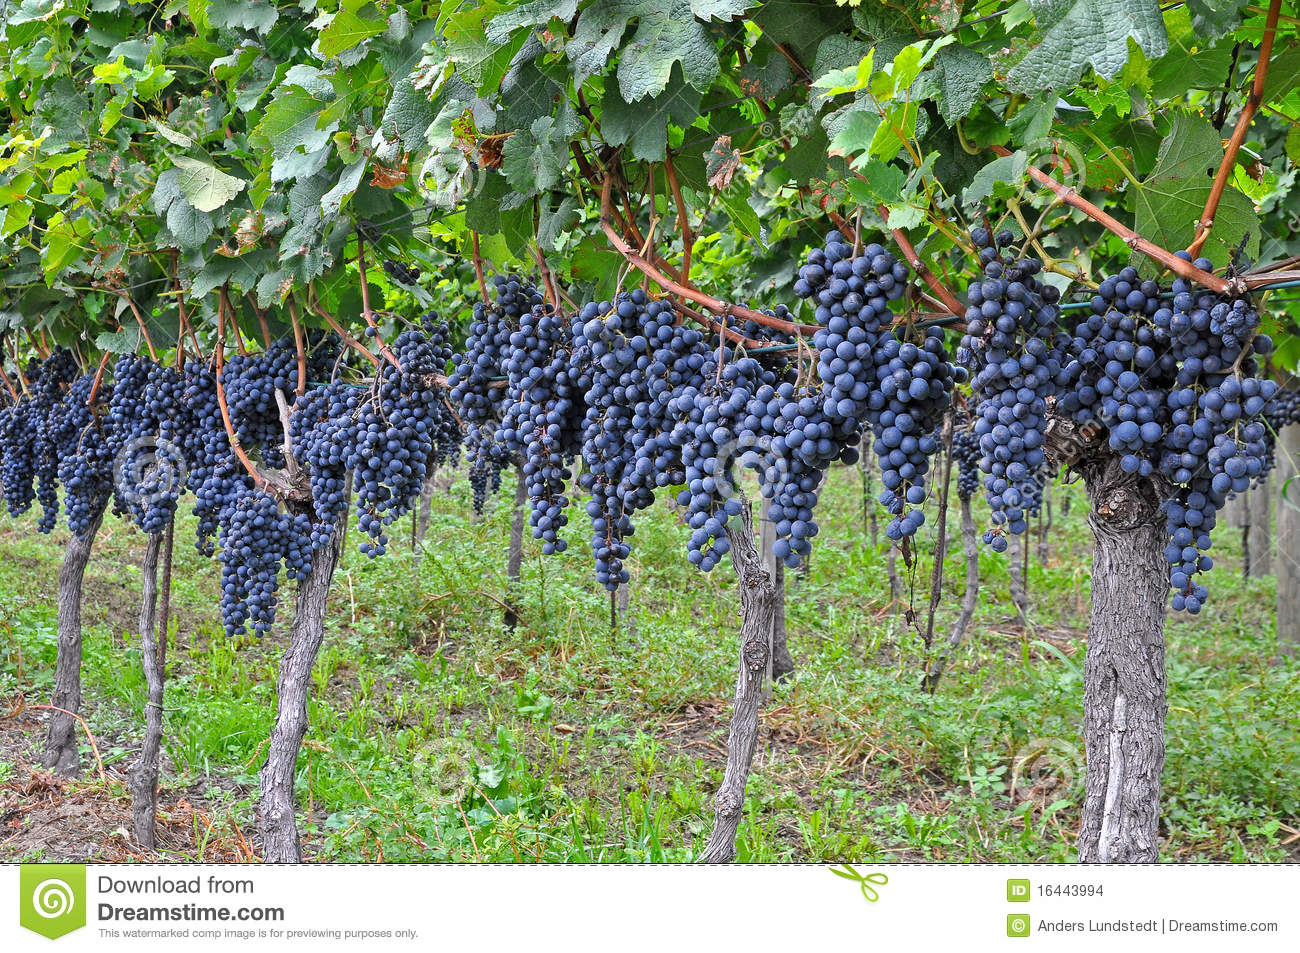 bunches-grapes-16443994.jpg